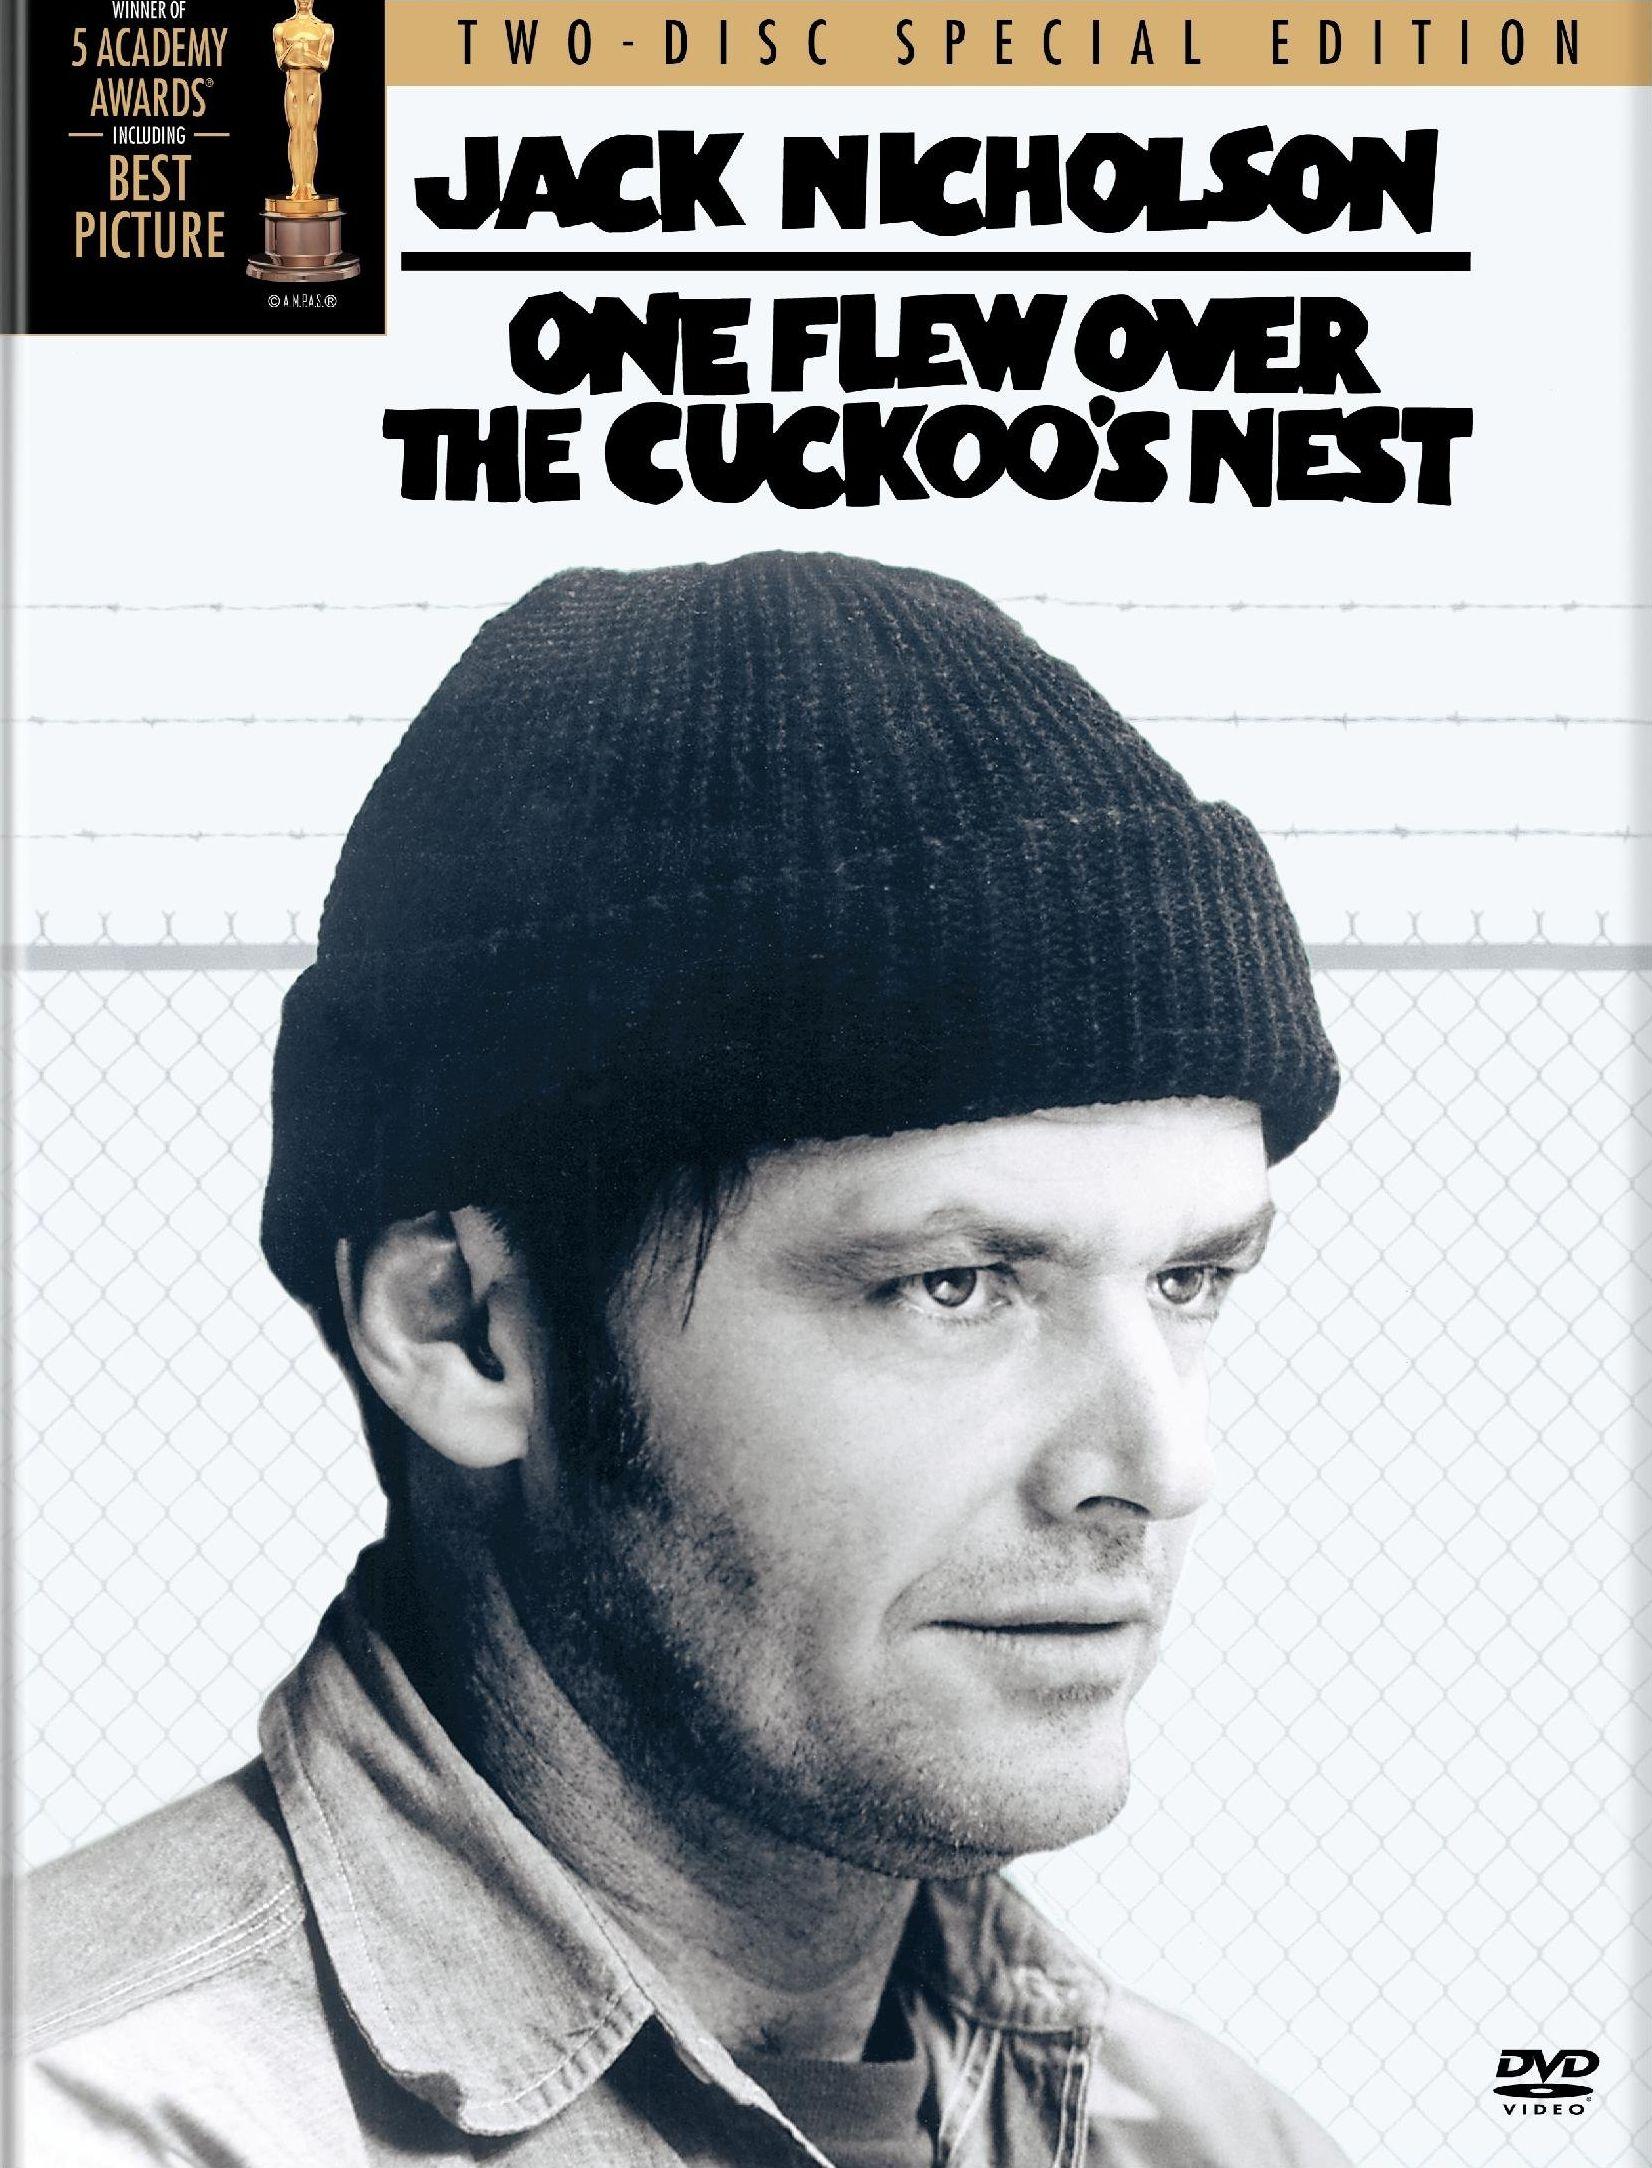 1652x2168px One Flew Over The Cuckoo's Nest 405.49 KB